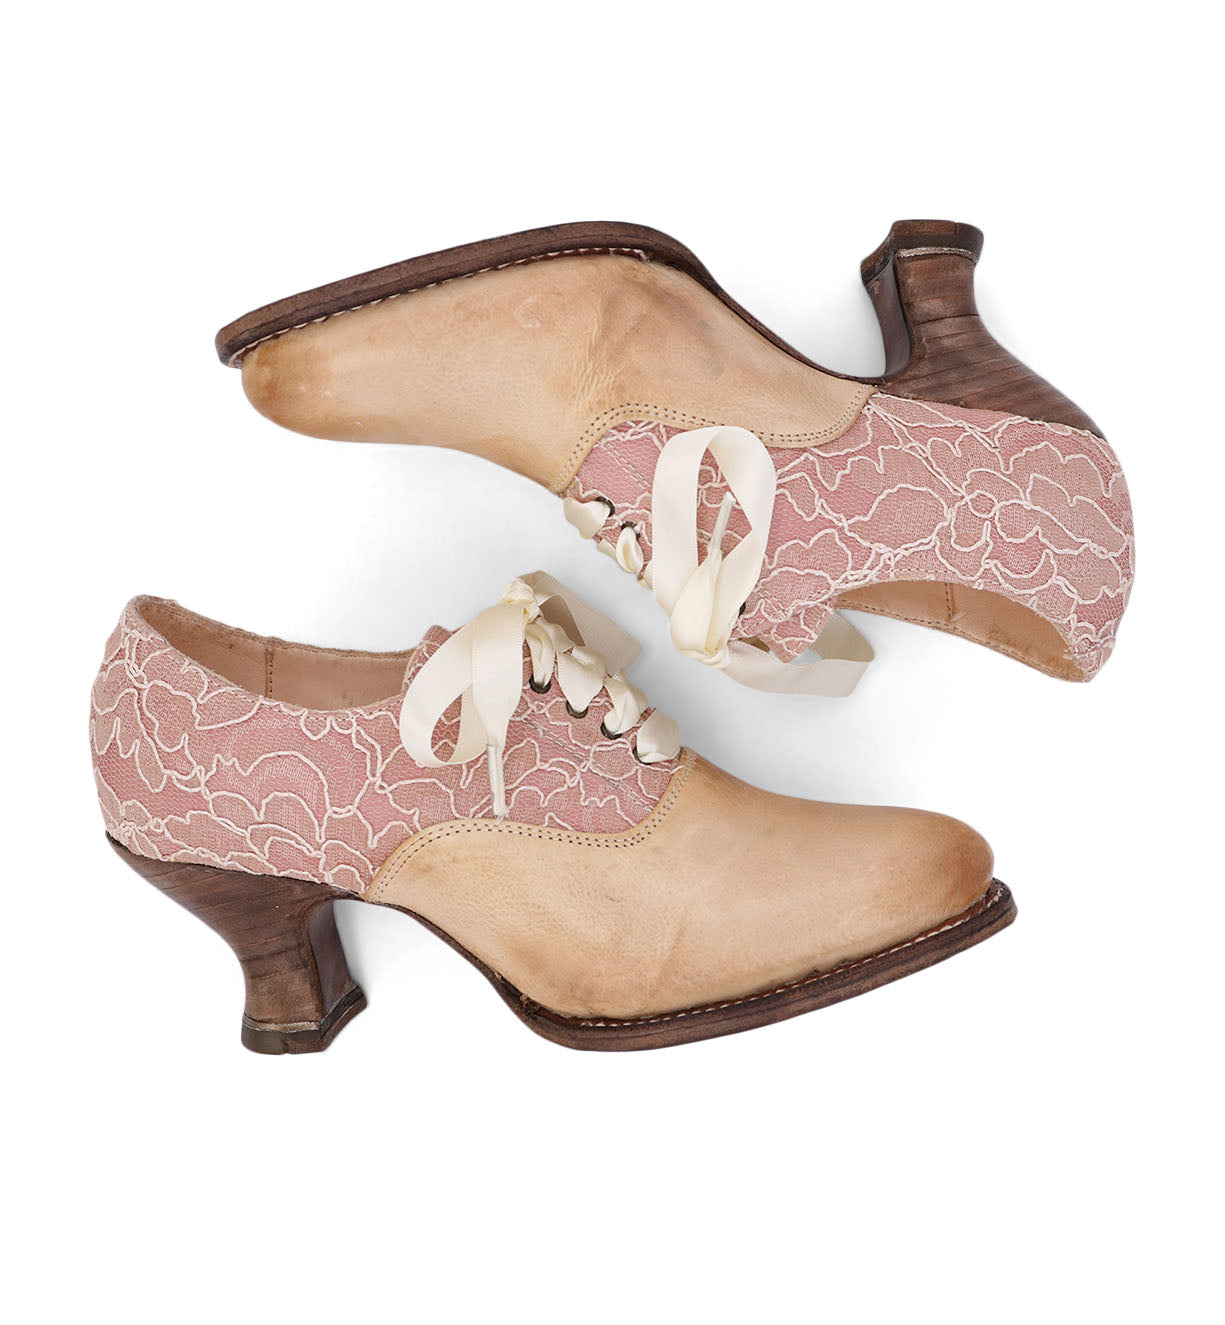 A pair of Janet women's shoes by Oak Tree Farms with lace and a neutral look.